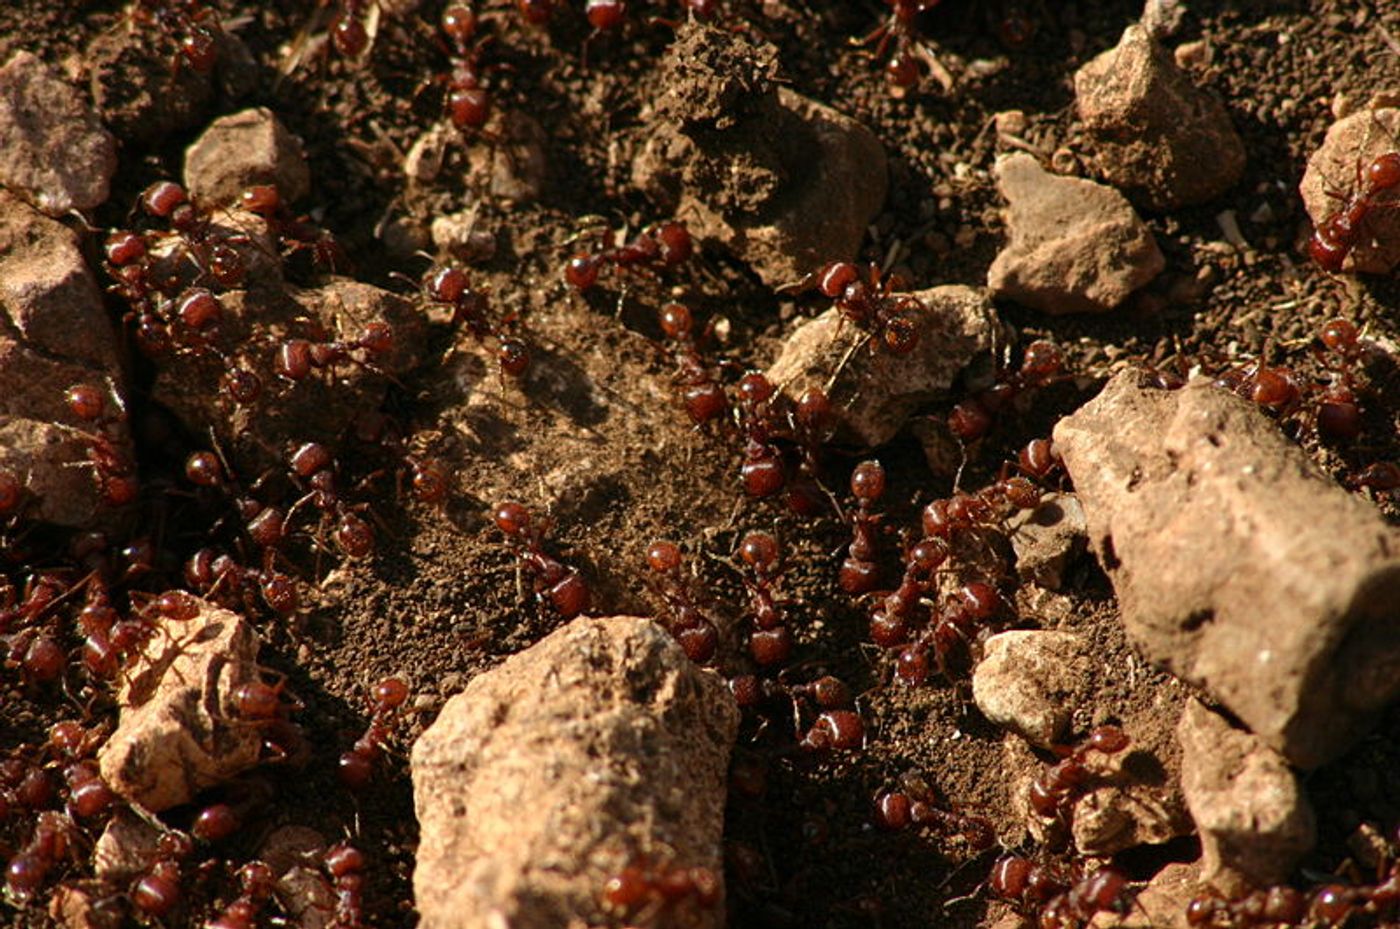 Fire ants (Solenopsis invicta) on the hill-top of West Trail, Lost Maples State Natural Area, Texas. Credit: Wing-Chi Poon